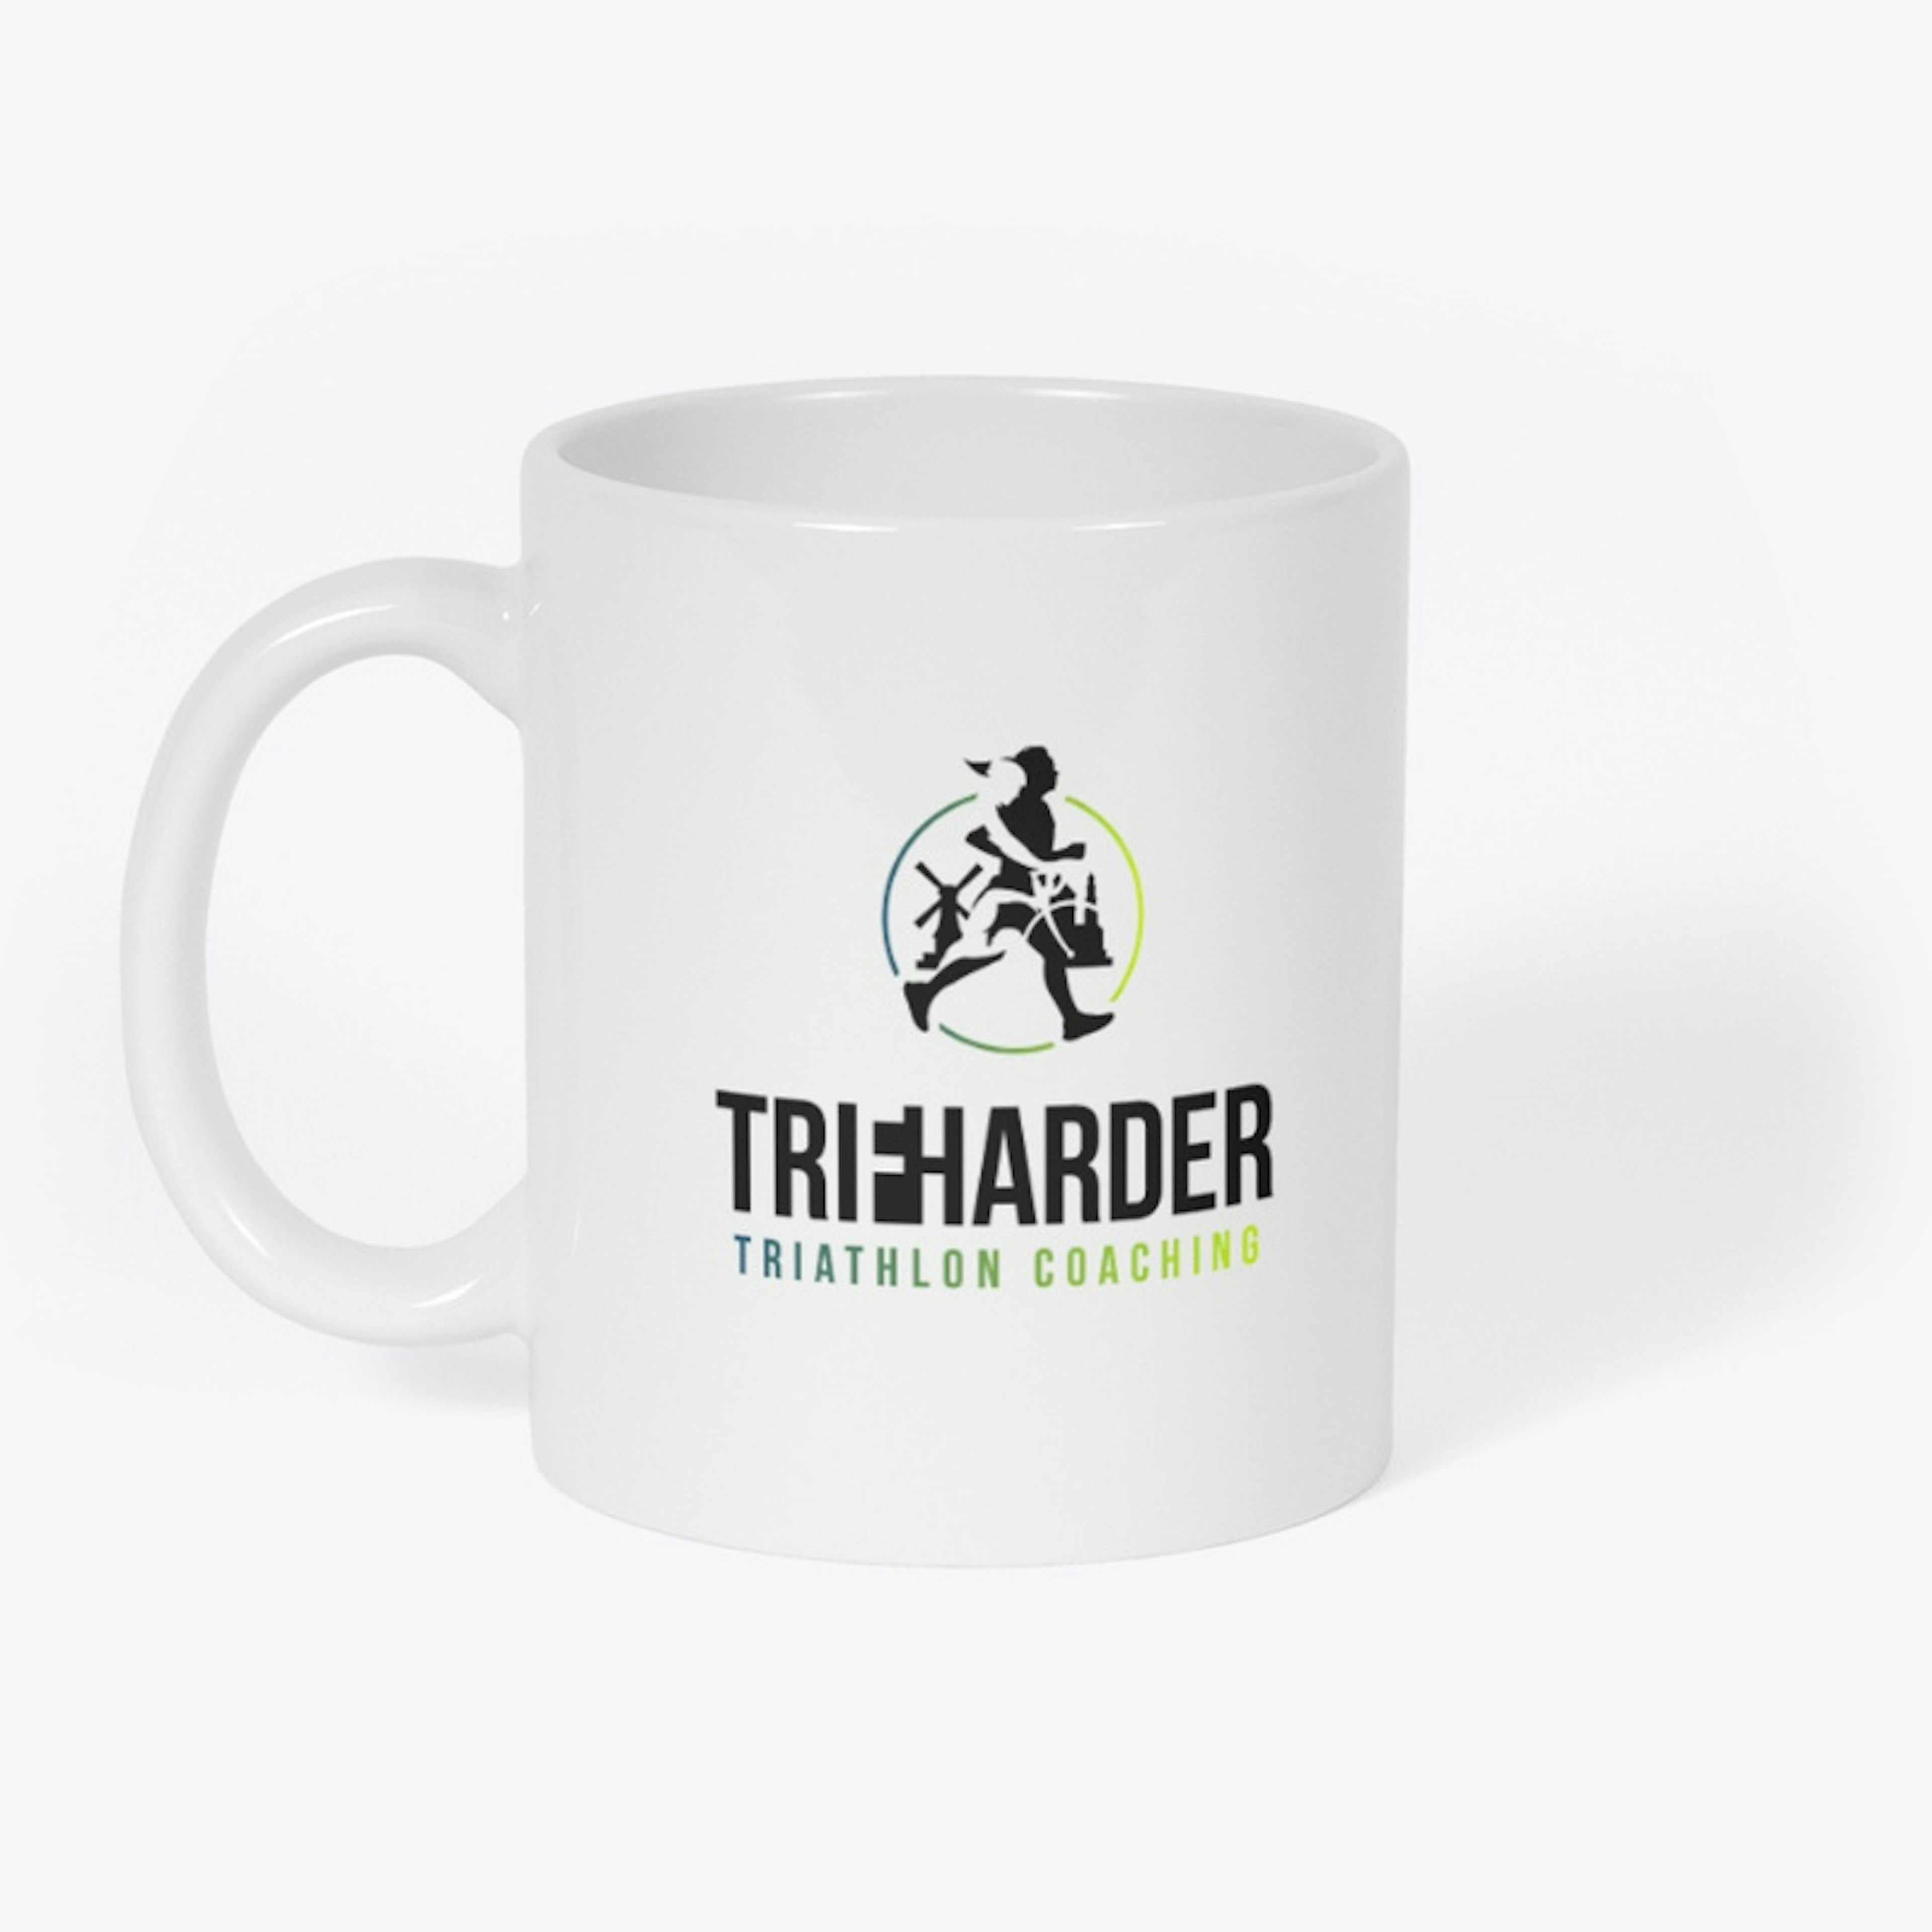 Trifharder bold with black! 